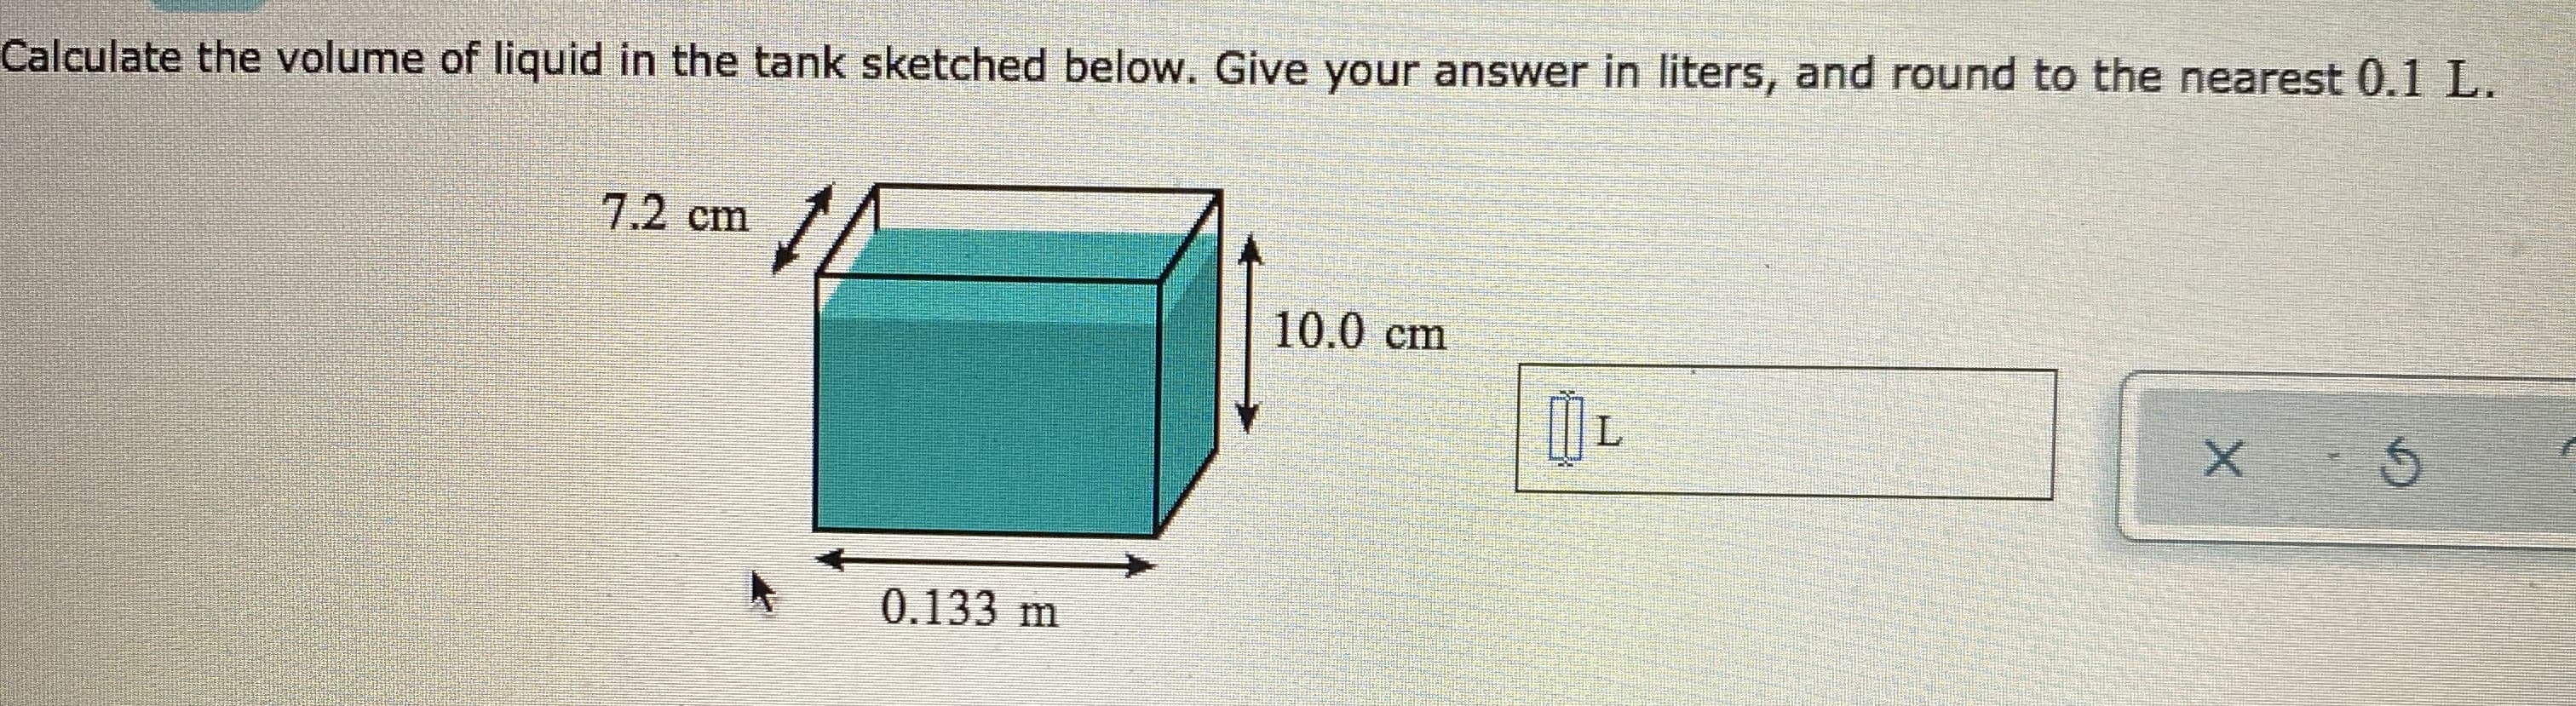 Calculate the volume of liquid in the tank sketched below. Give your answer in liters, and round to the nearest 0.1 L.
